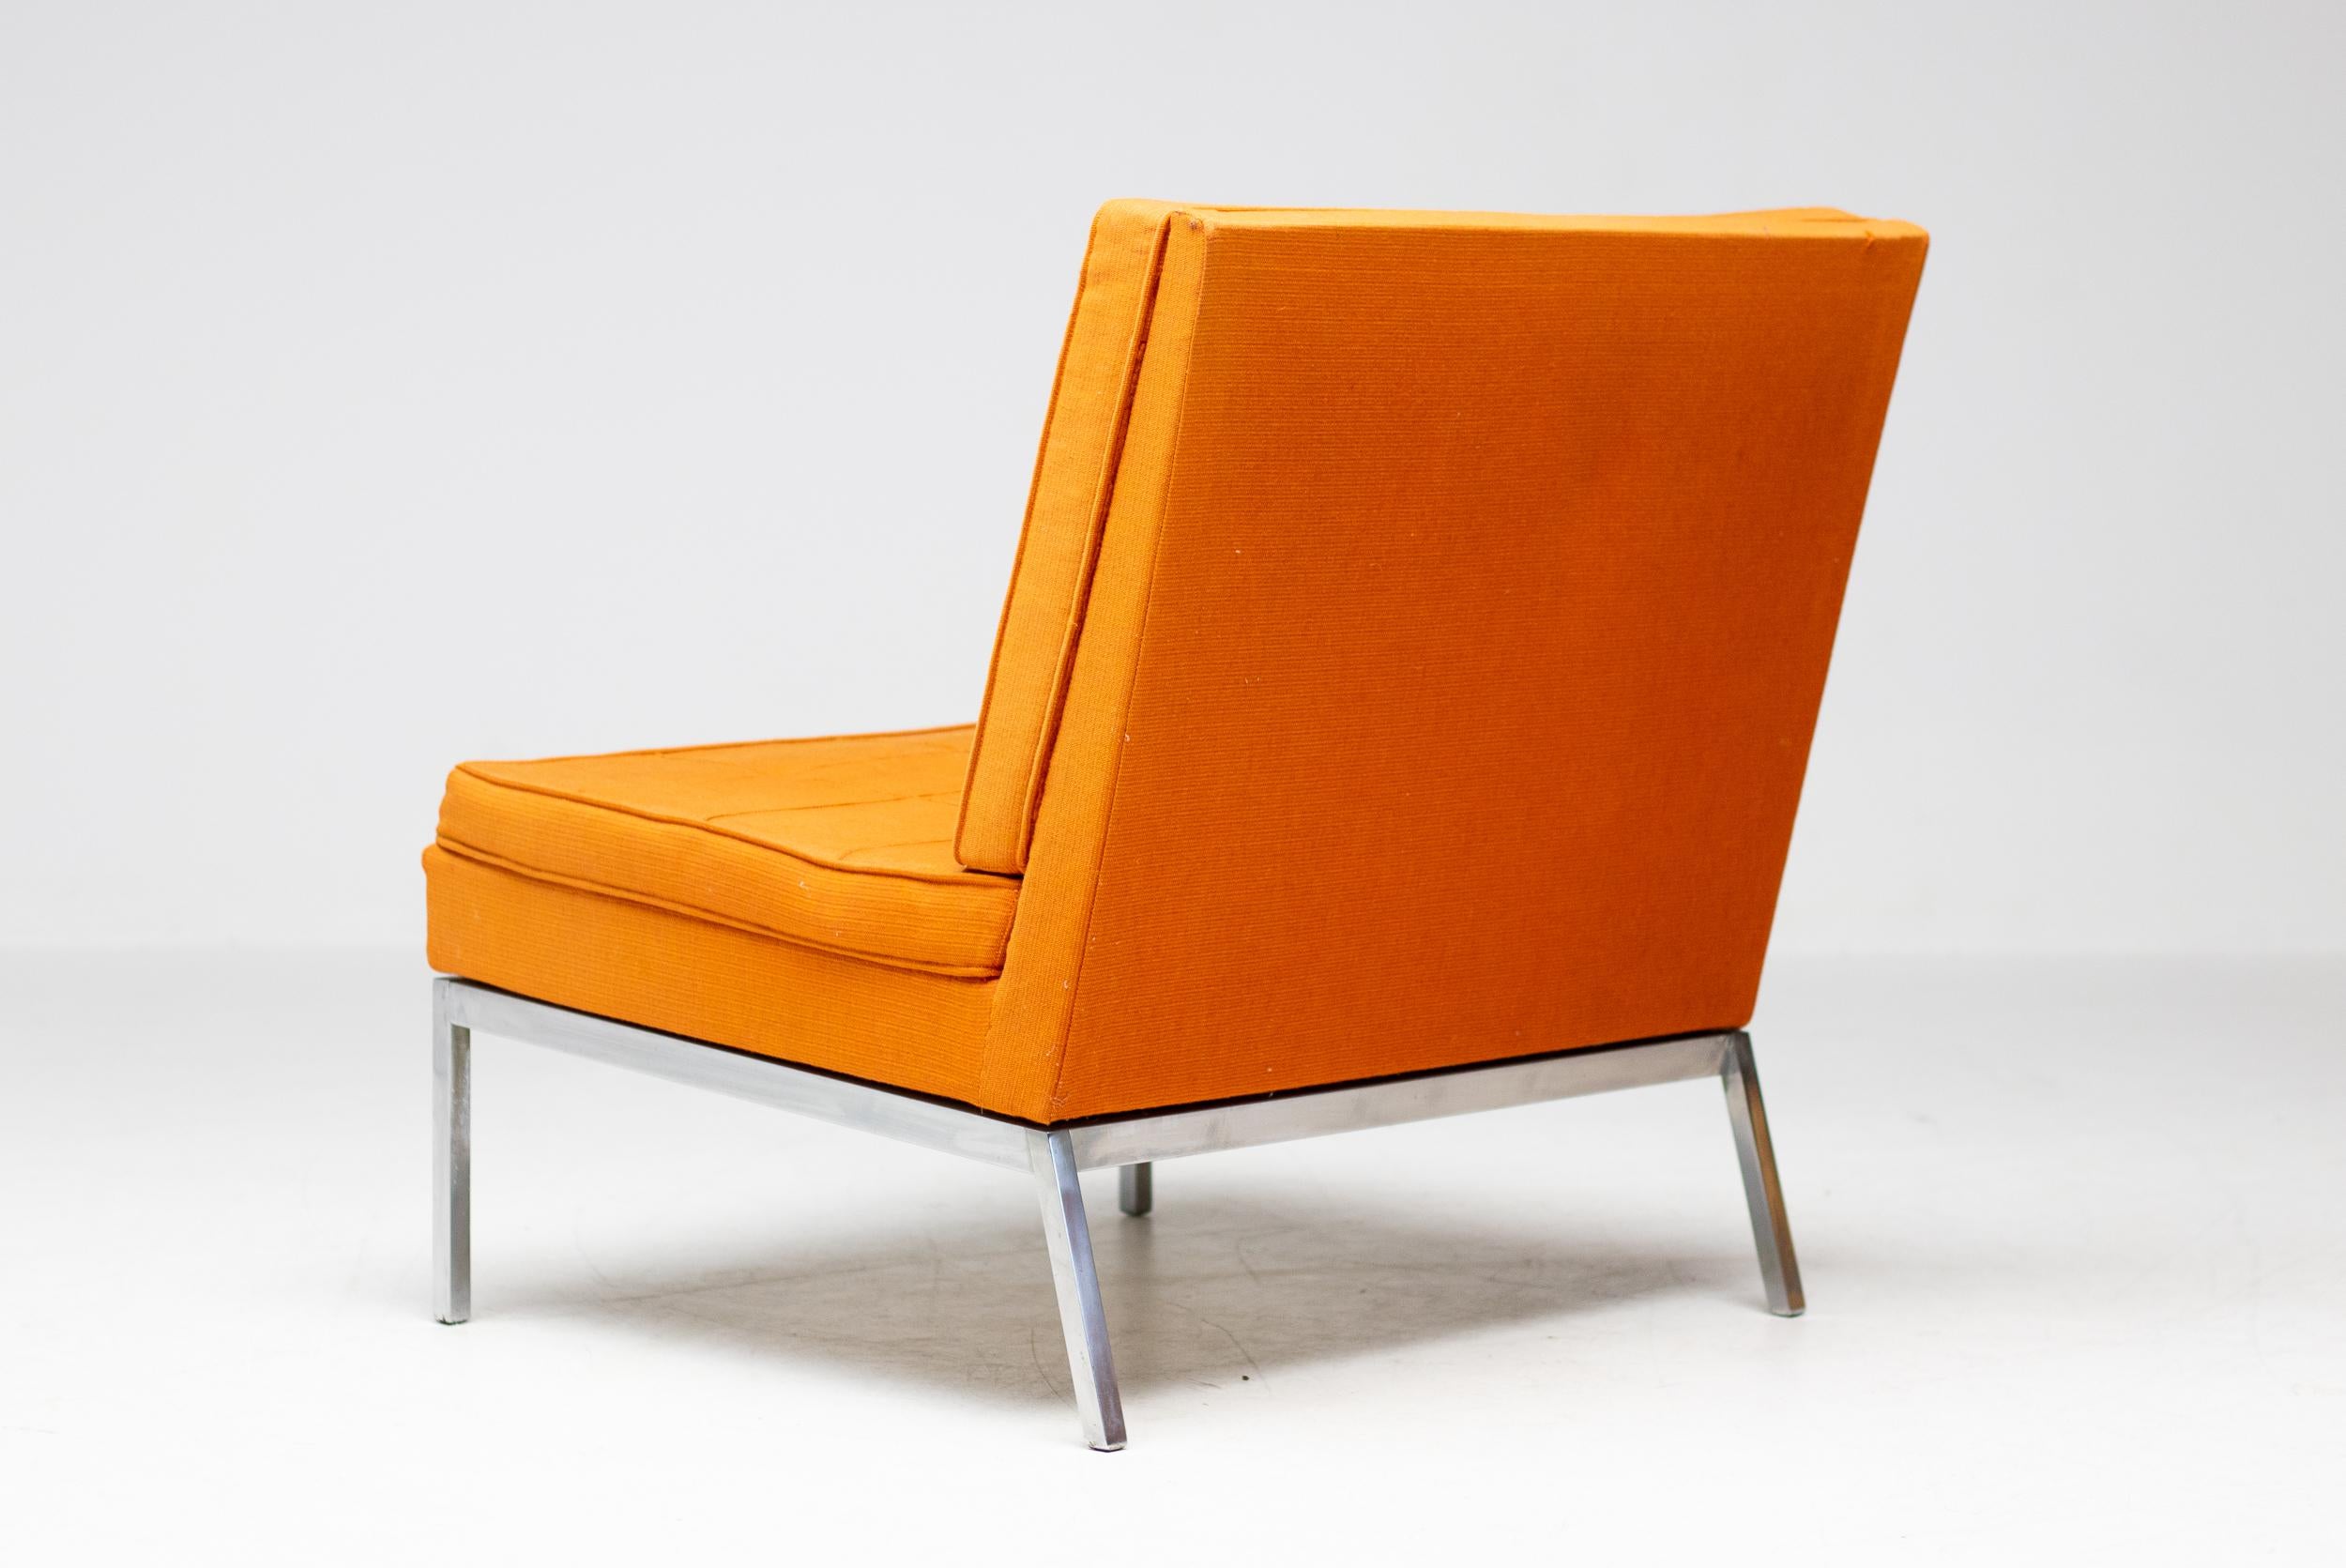 Slipper chair designed in 1955 by Florence Knoll and produced by Knoll International. 
Model No. 65, produced from 1955-1973. We bought this chair directly from the family who bought it in 1956.
Still all original condition! The chair does still